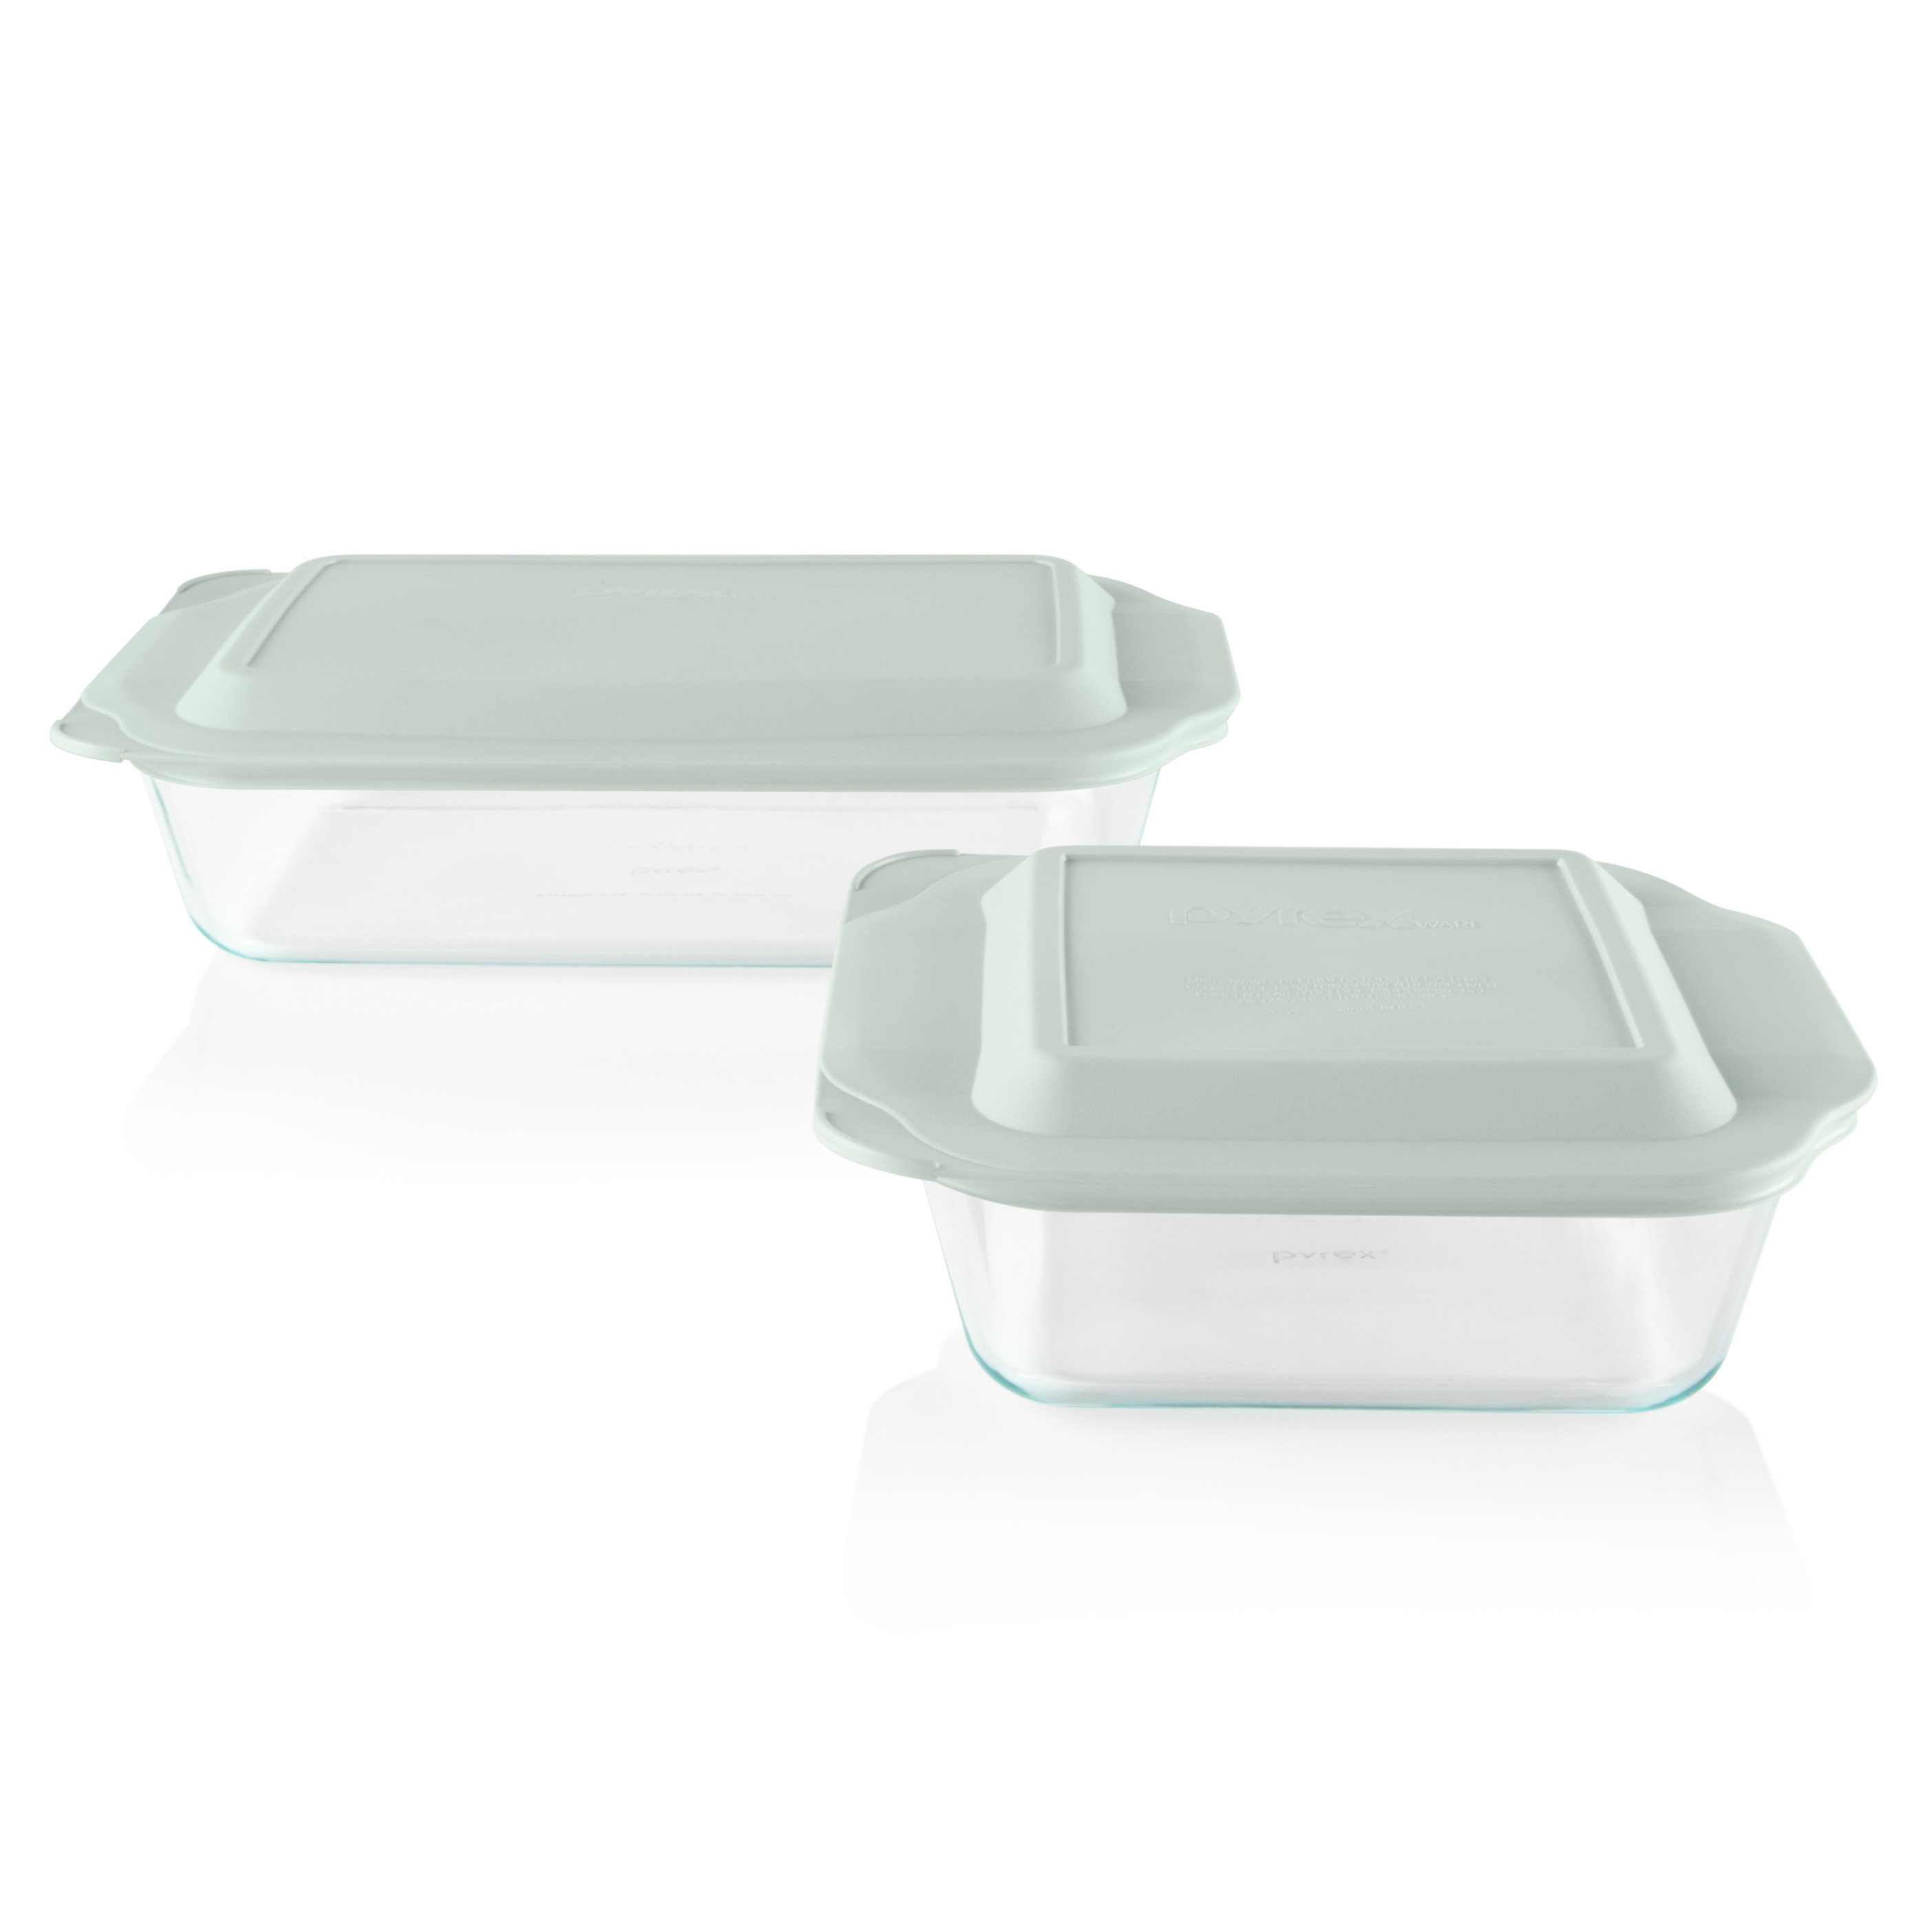 Rubbermaid DuraLite Glass Bakeware, 4-Piece Set w/ Lids, Baking Dishes or  Casserole Dishes, 9 x 13 and 8 x 12 & Reviews